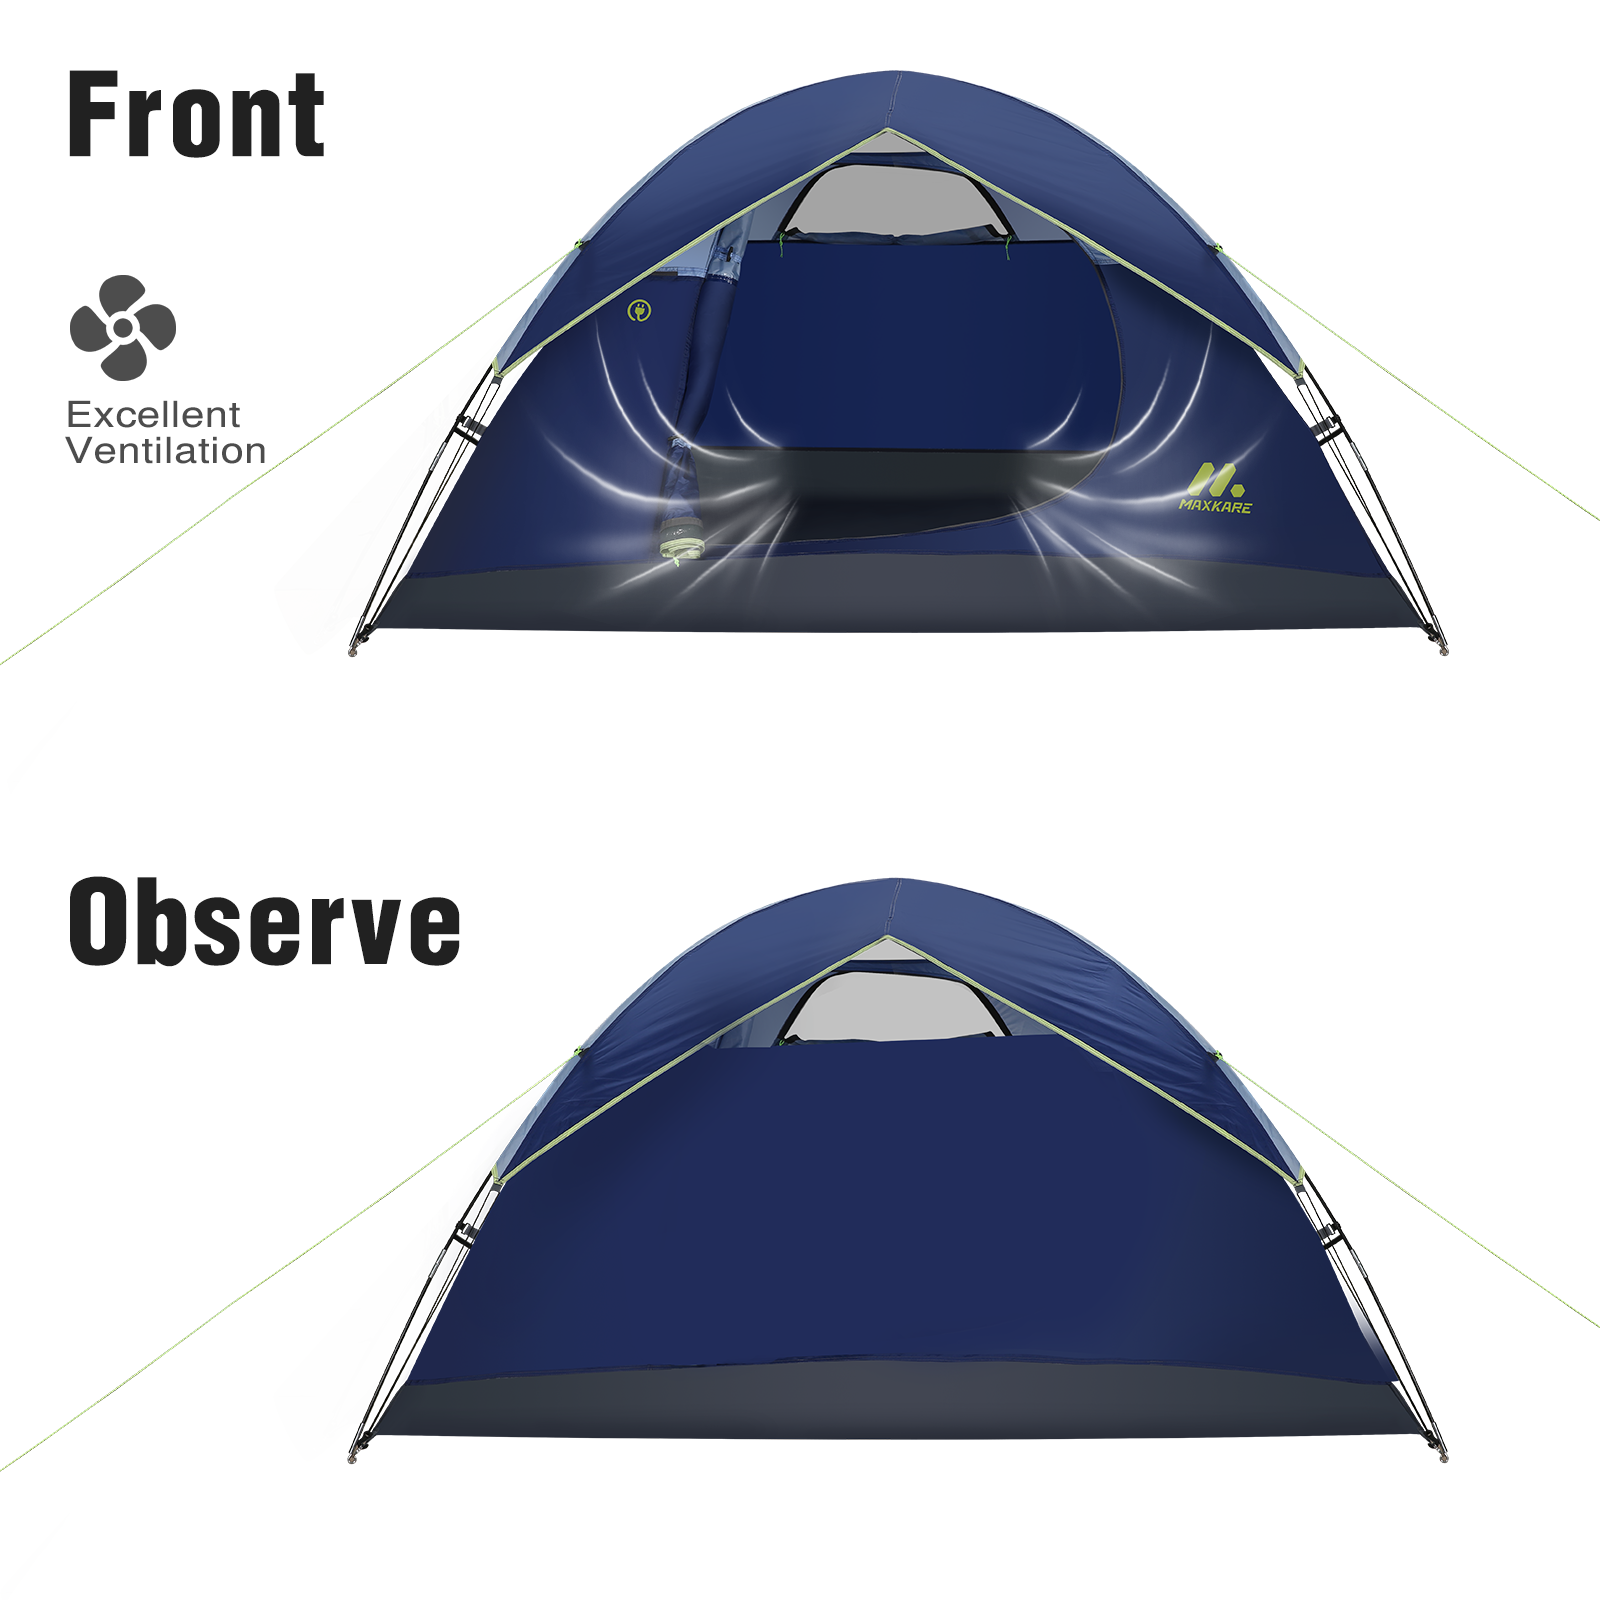 Load image into Gallery viewer, Dome Tent 4 Person Camp Tent with Rainfly, 2 Zippered Windows, Easy Set-up, Waterproof for Camping, Backpacking &amp; Hiking, Fishing Outdoor - Blue
